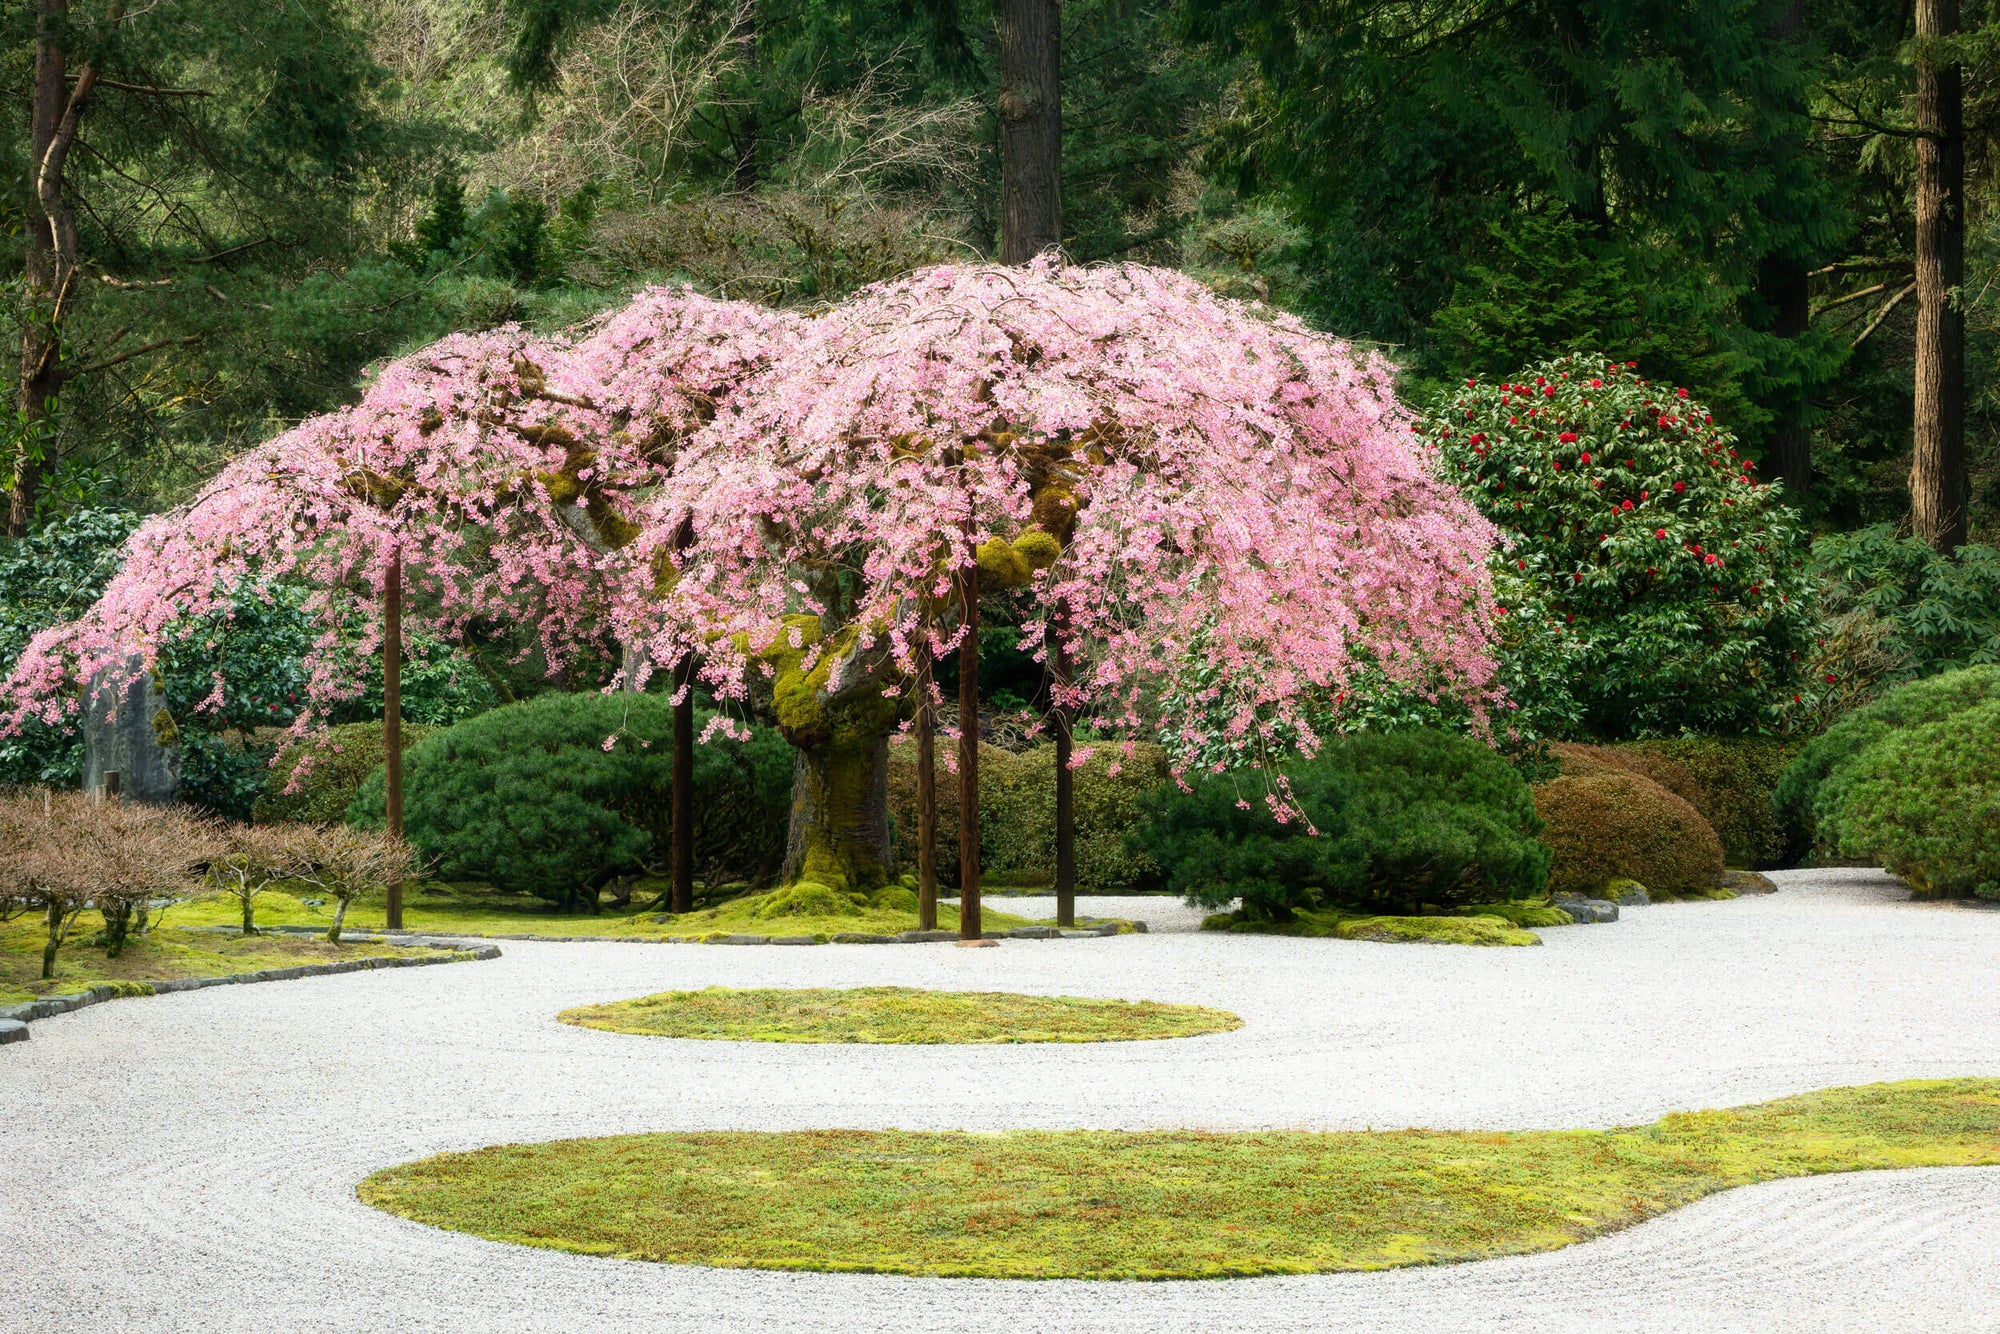 A cherry blossoms picture from Portland Japanese Garden showing a weeping cherry tree.